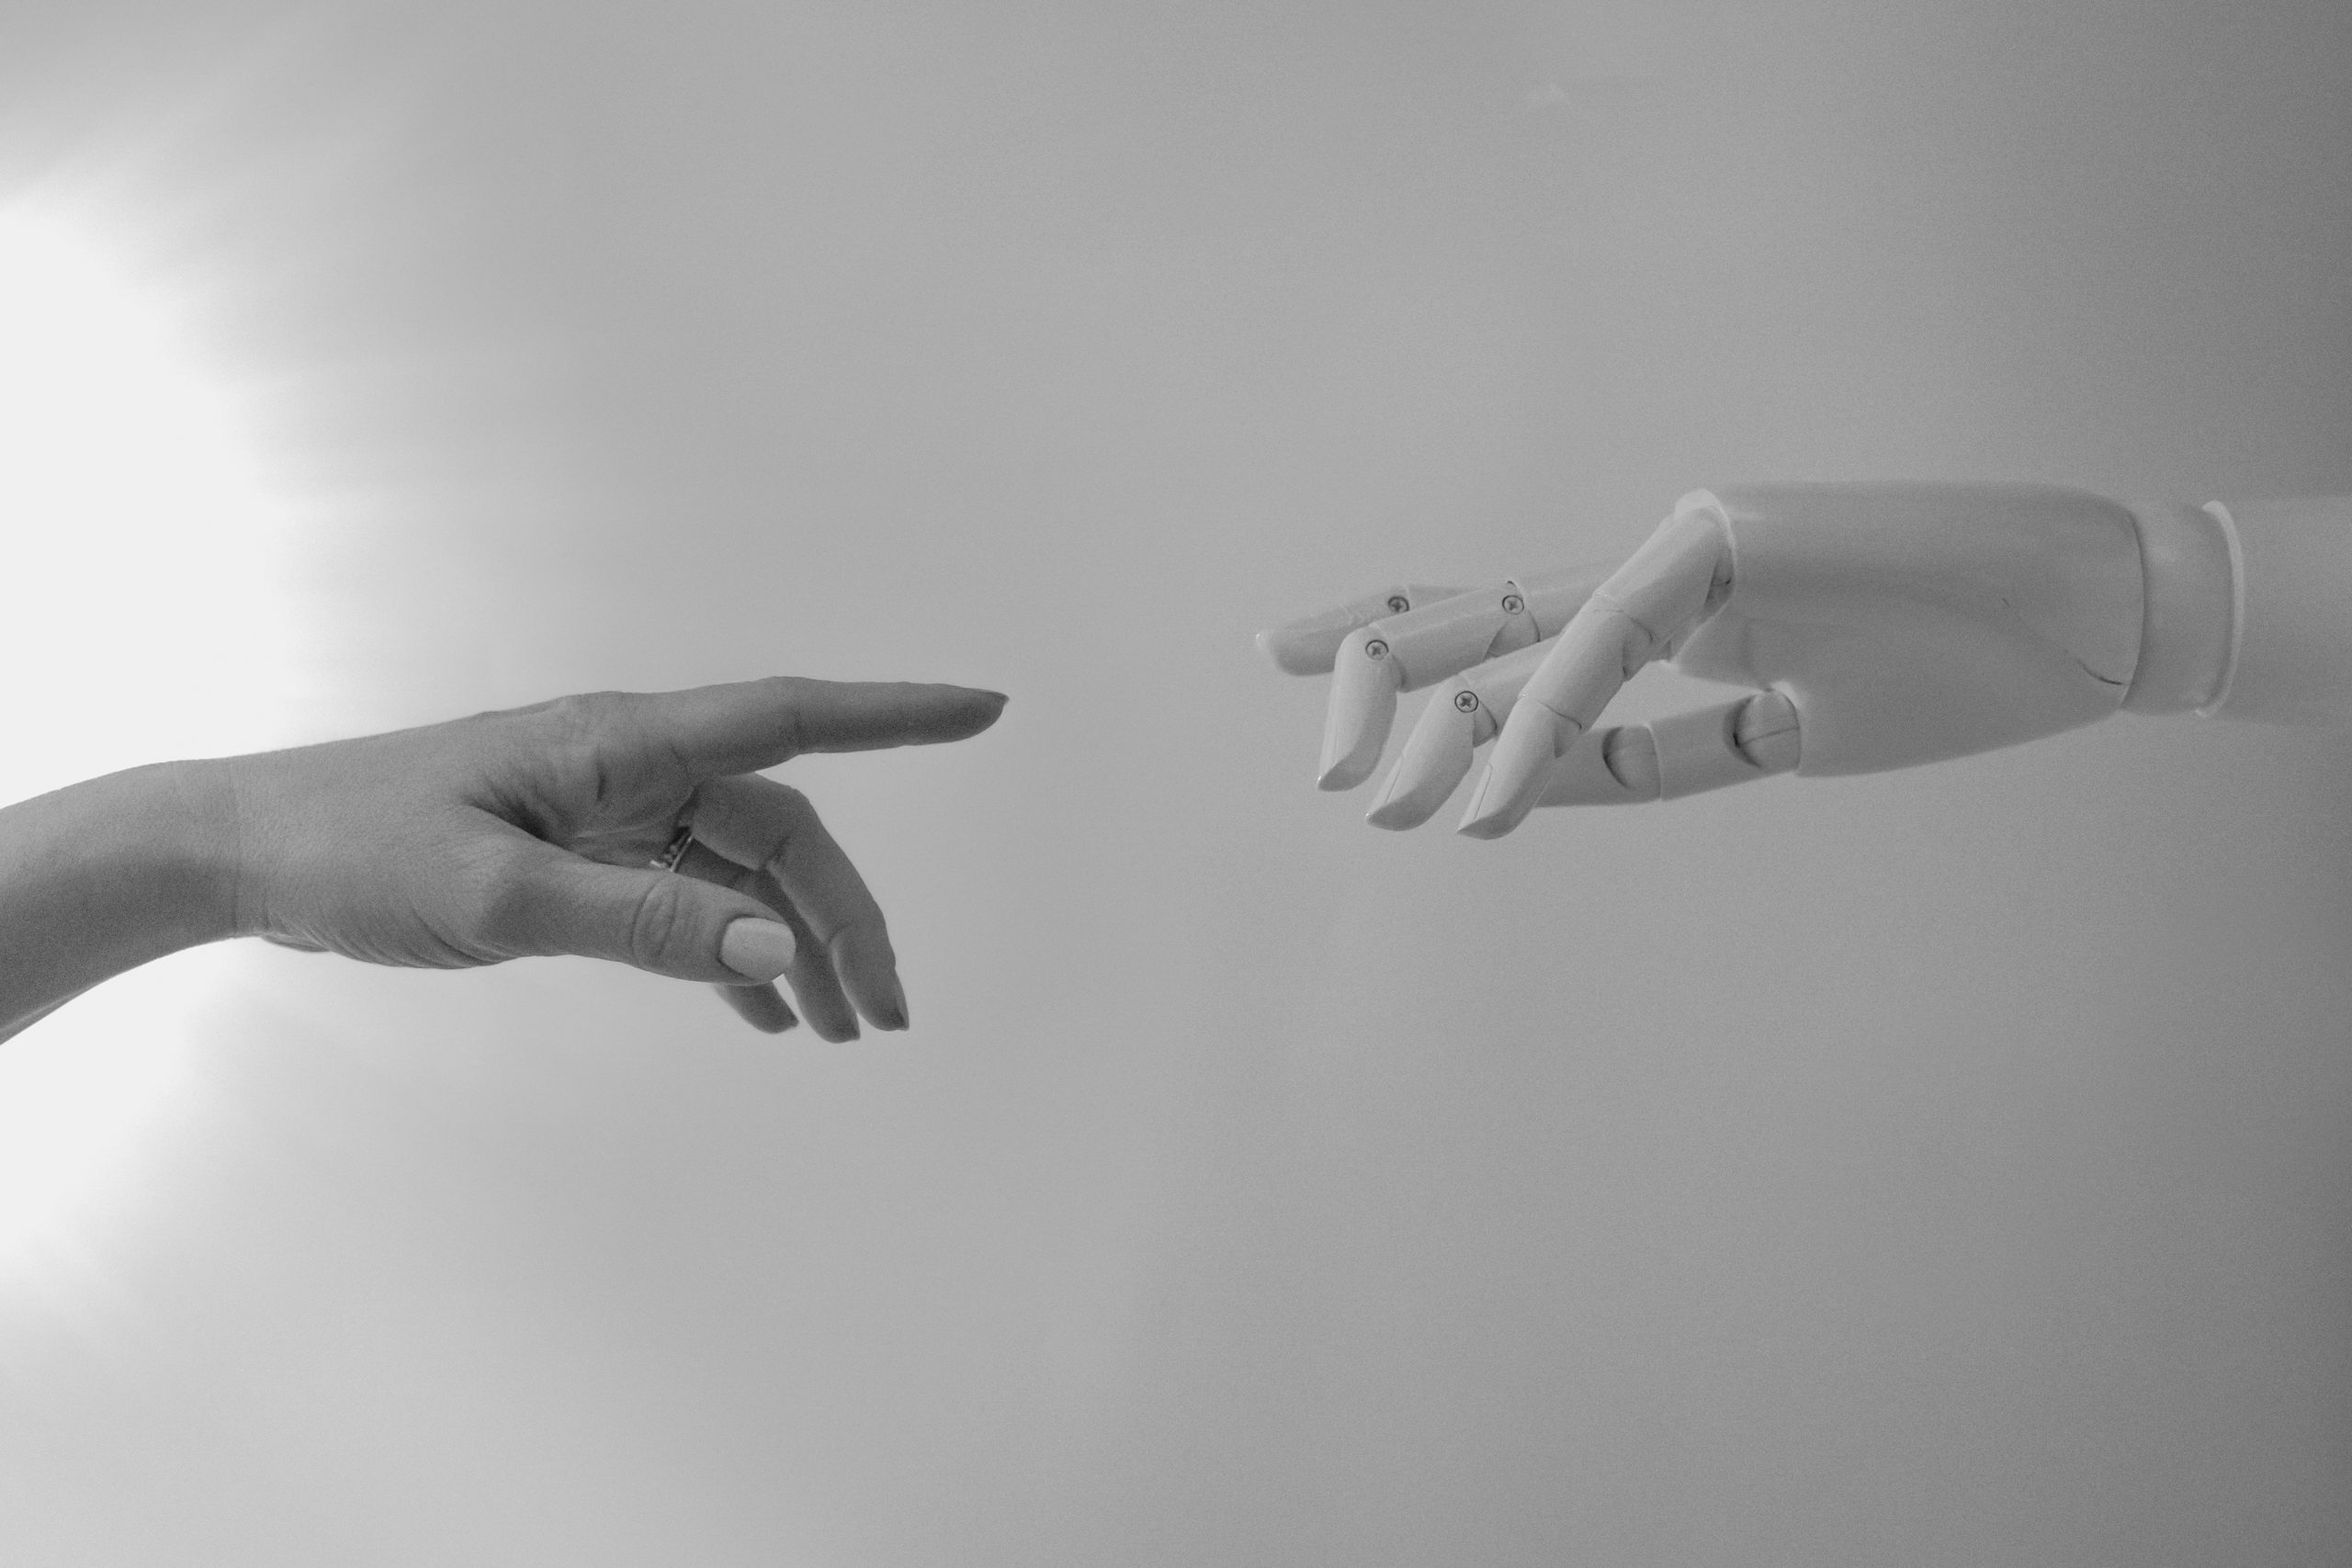 A human and a robot hand replicating the painting "The creation of adam" on white background